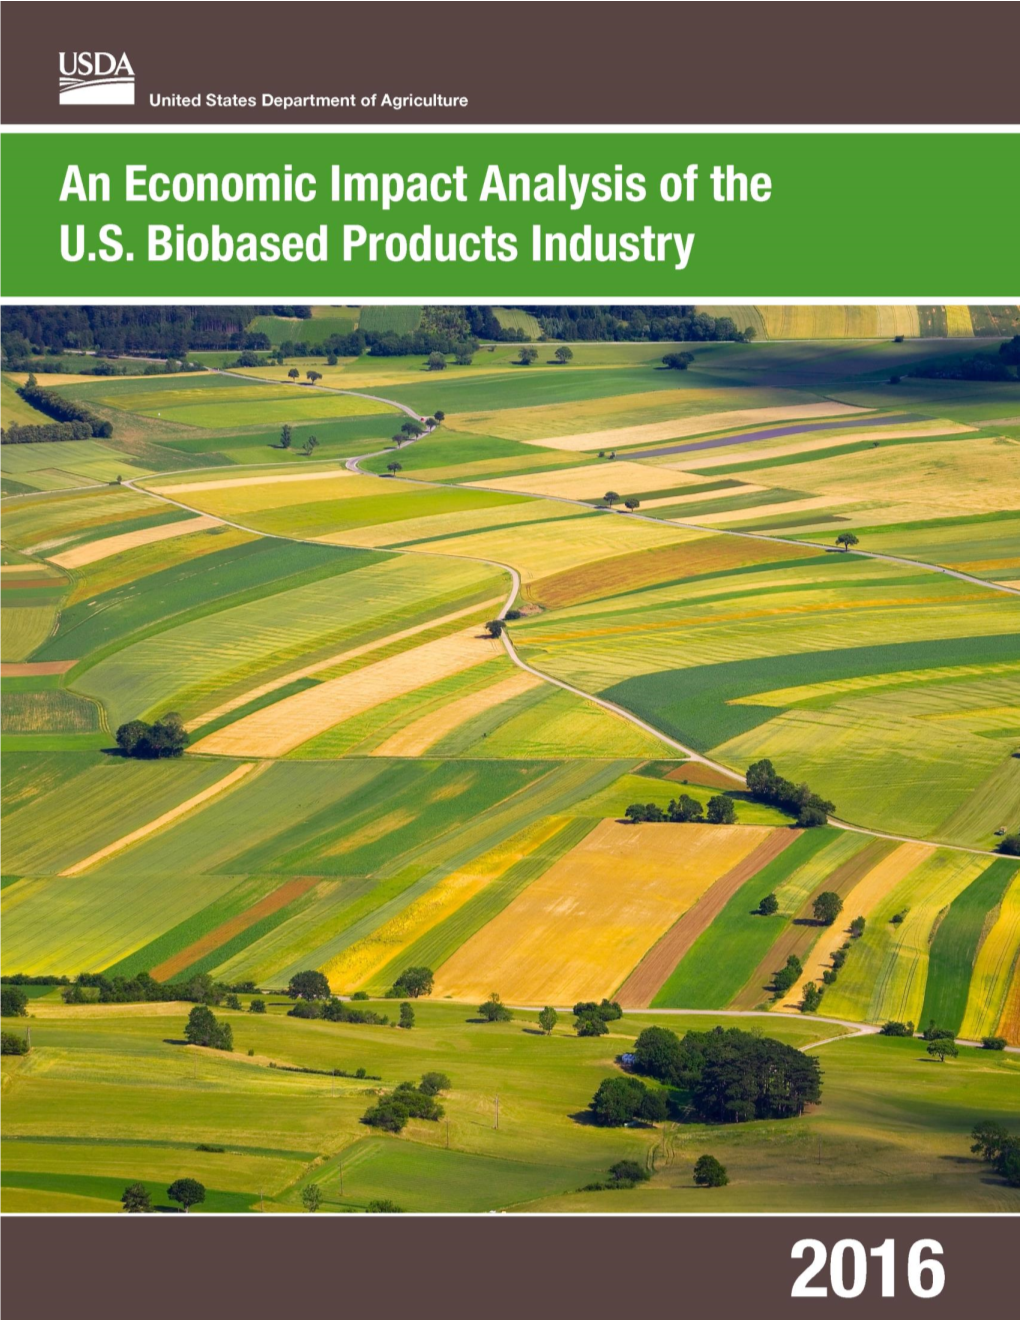 An Economic Impact Analysis of the U.S. Biobased Products Industry